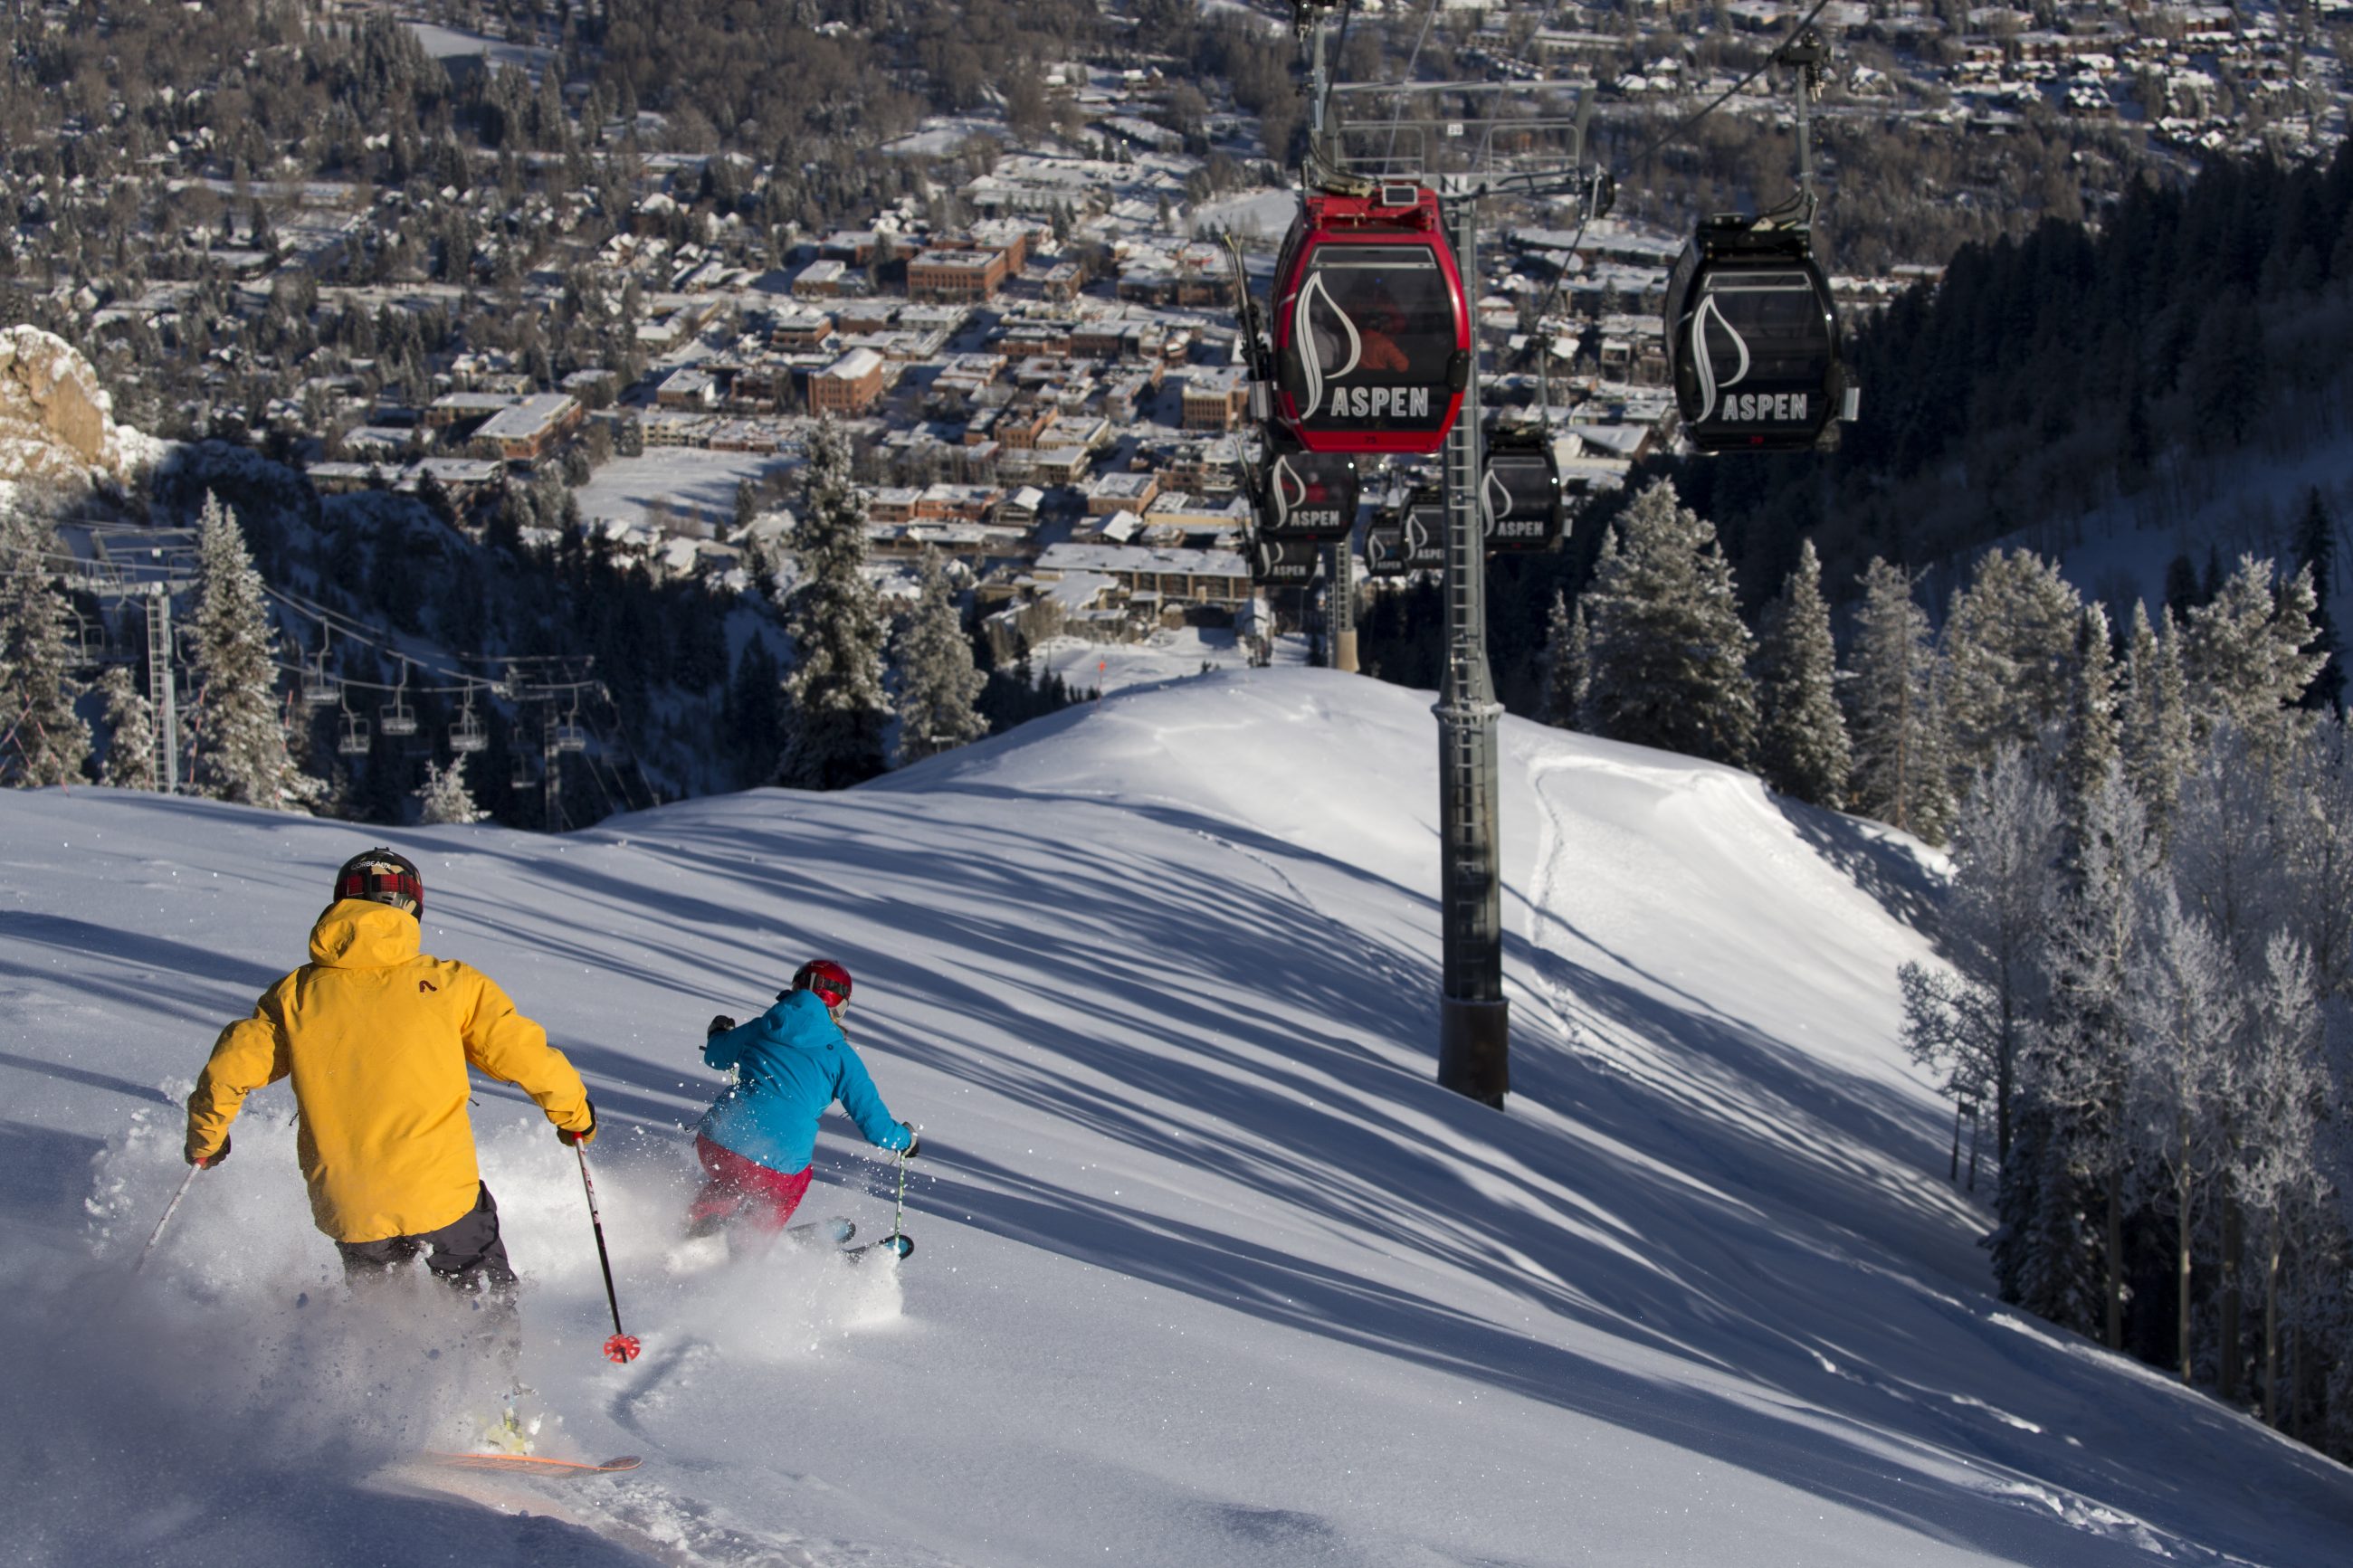 Aspen is number 8th in the list of most expensive ski resorts in the USA. The most expensive ski resorts in the USA.